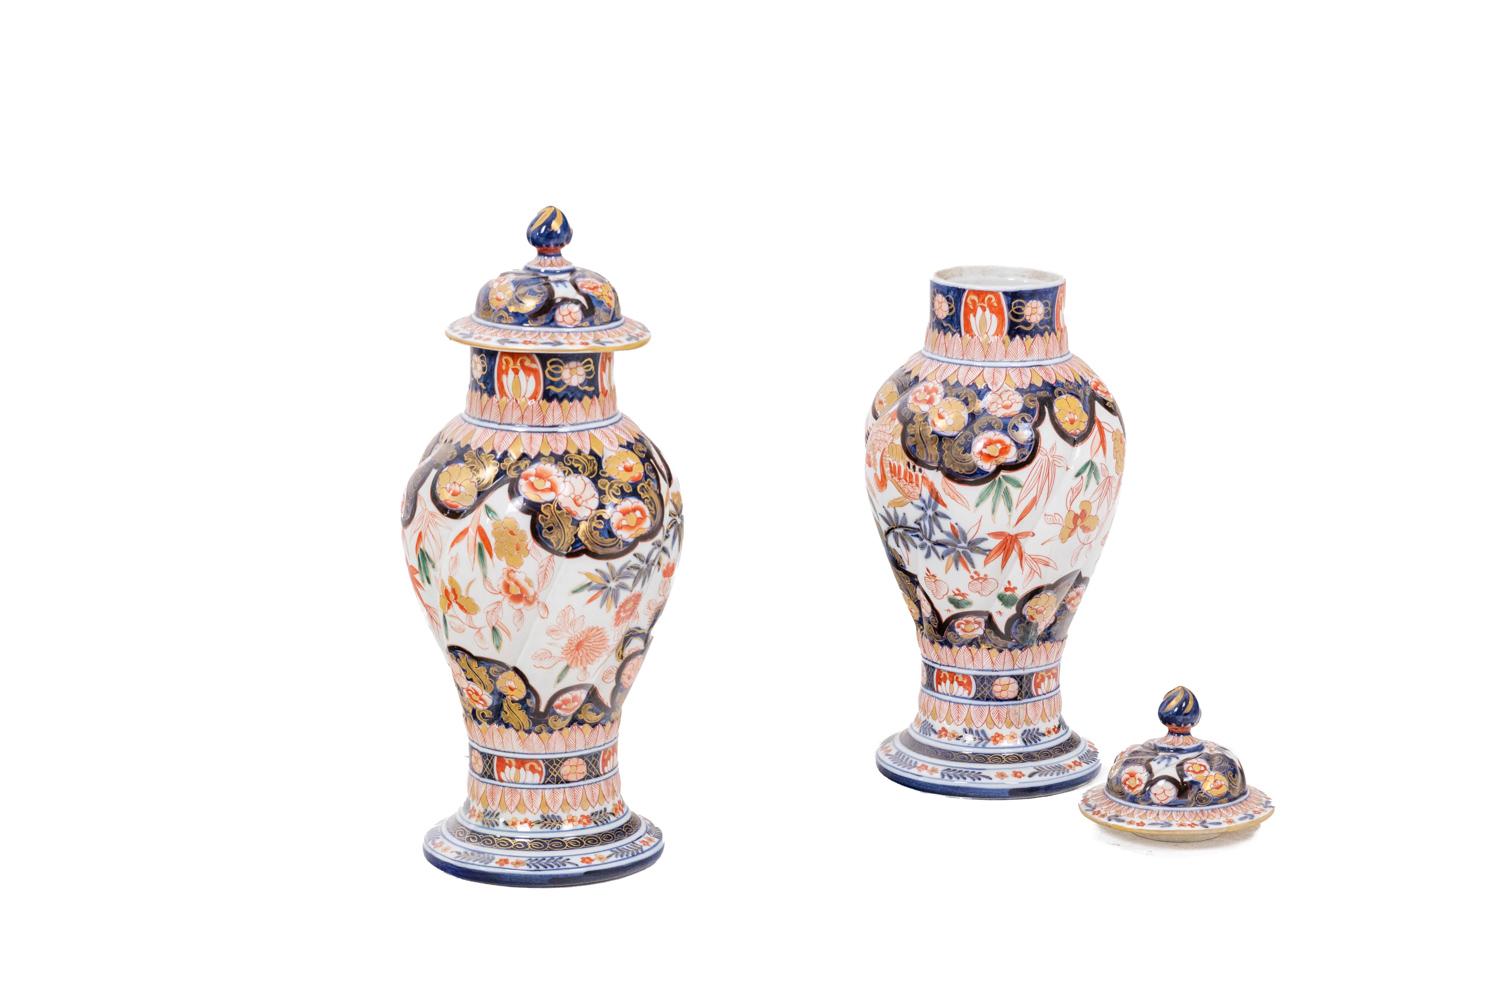 Pair of vases – or jugs – in porcalain of Imari and swollen in shape adorned with leaves, in shades of cobalt blue and red verging on saffron.

Japanese work realized circa 1880.